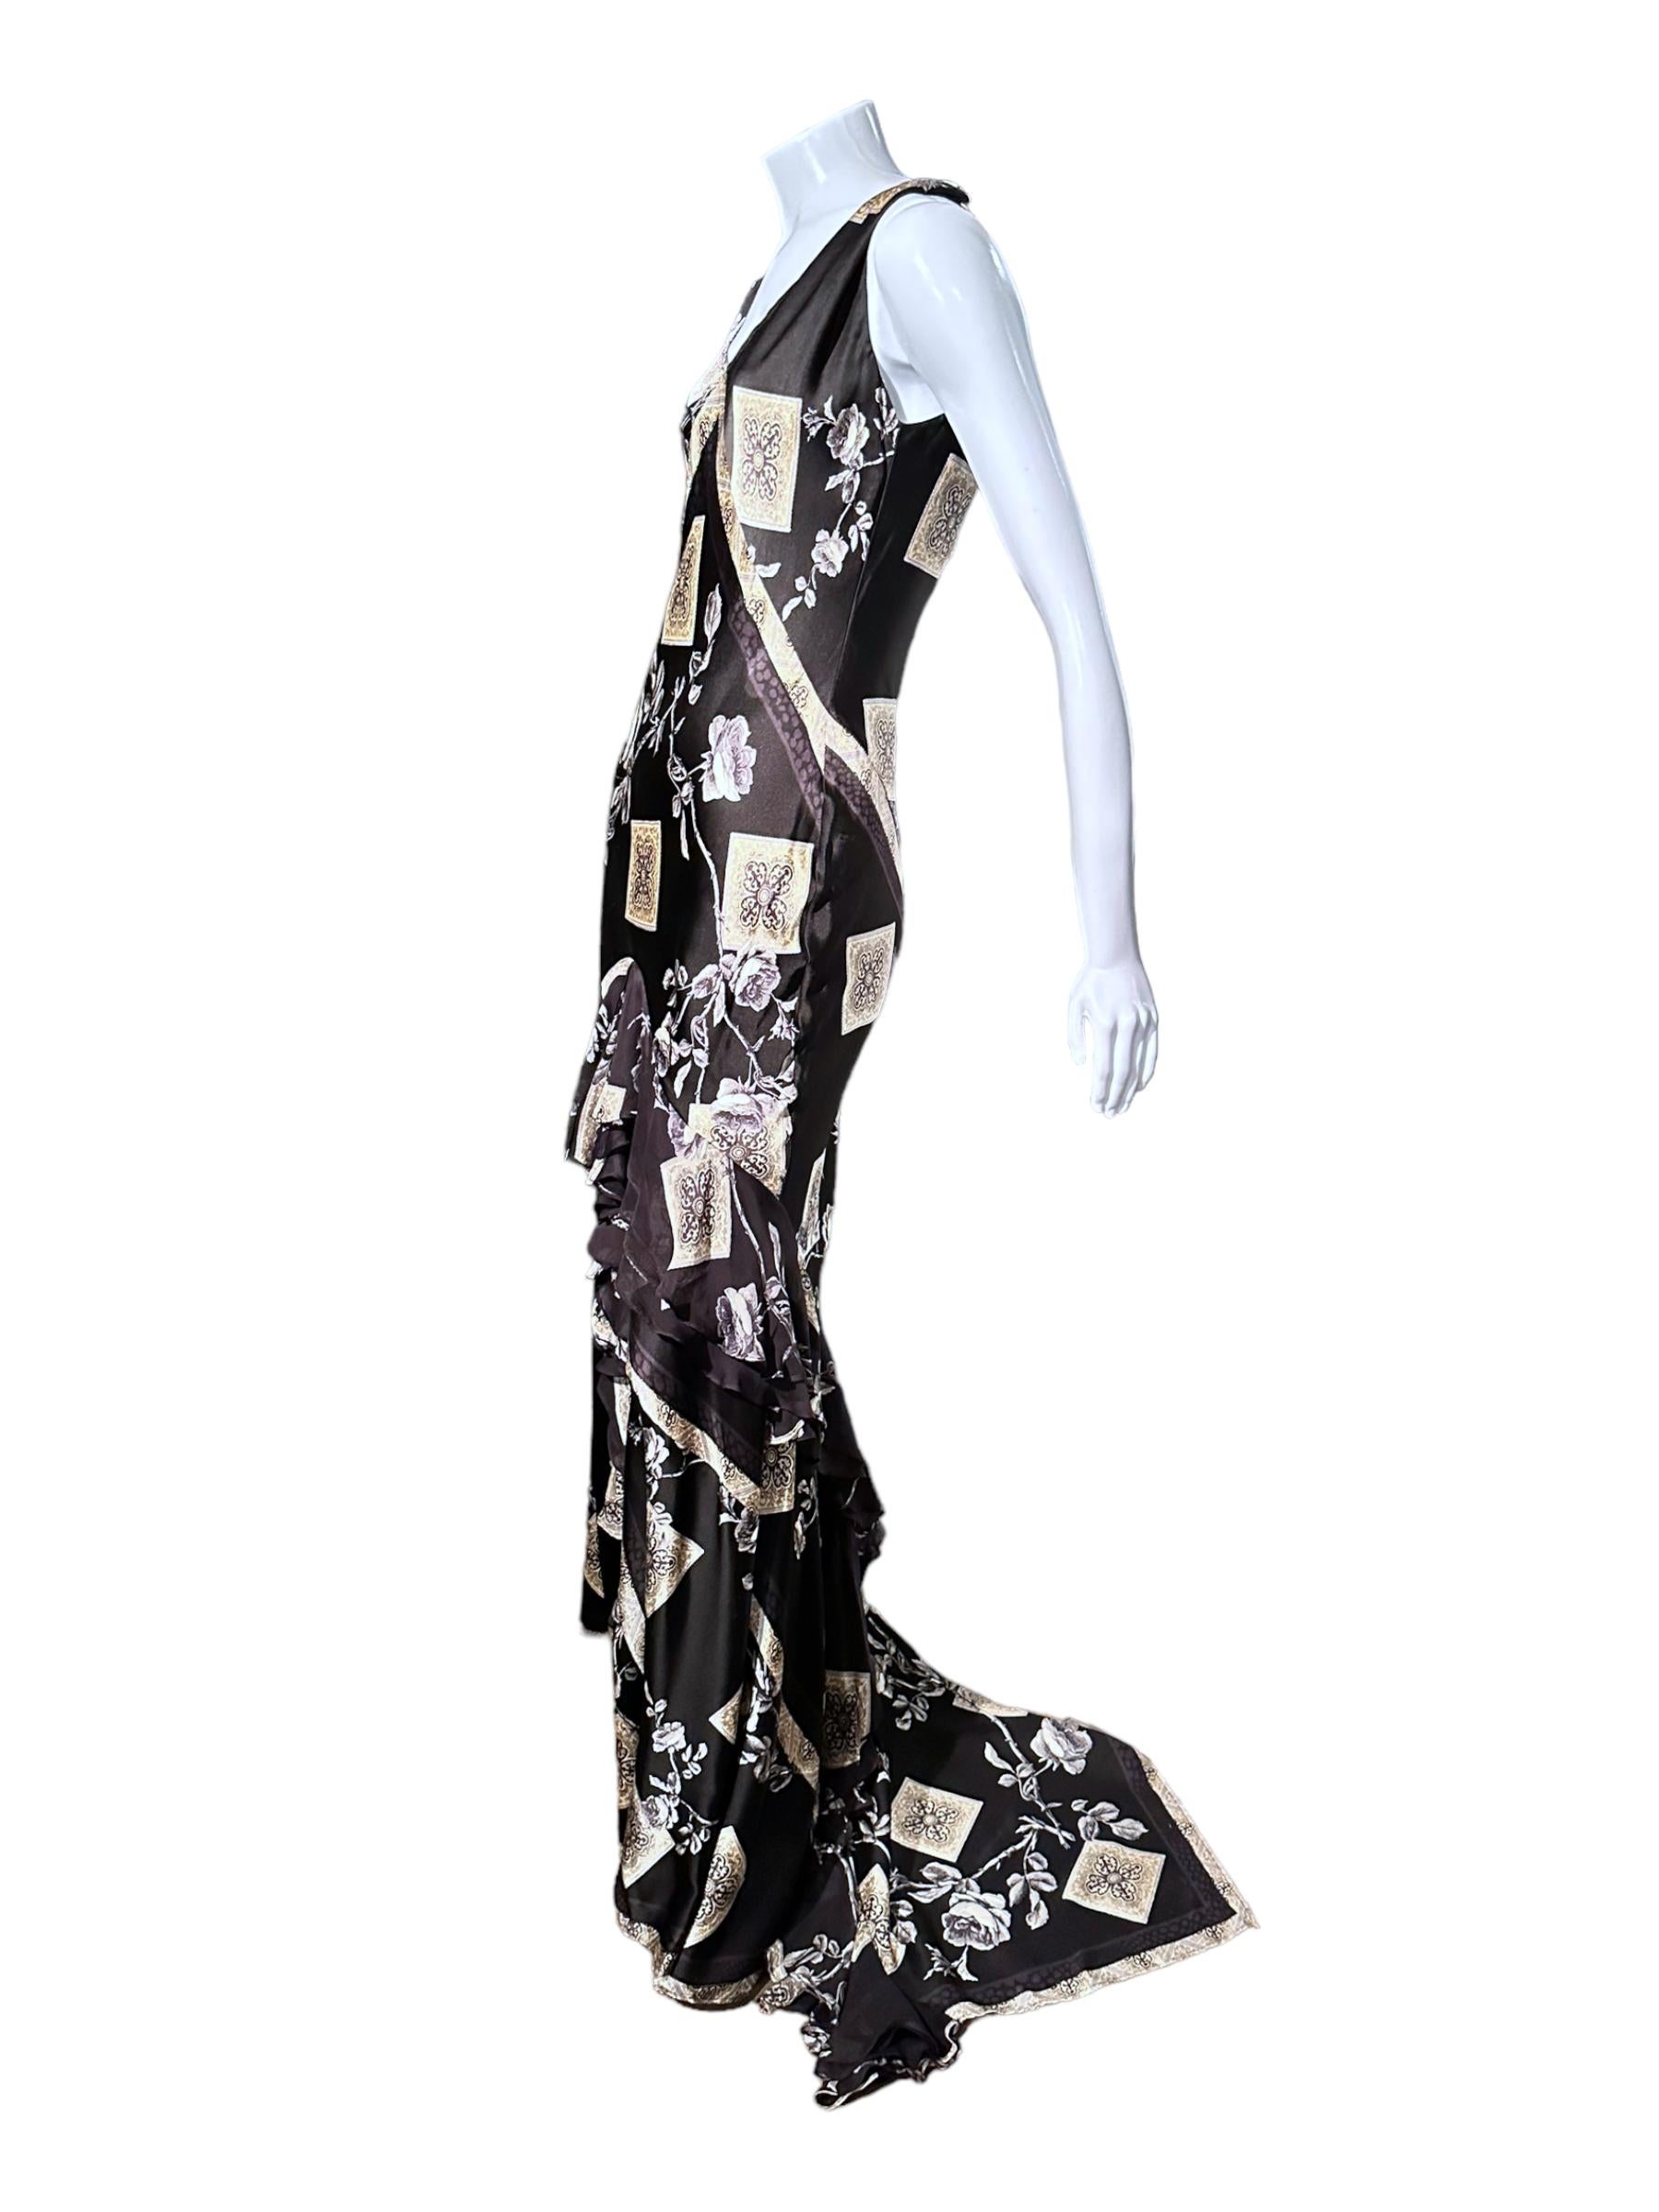 ICONIC FW 2005 Roberto Cavalli Chinoiserie Print Black and Gold Silk Bias Gown In Excellent Condition For Sale In São Paulo, SP